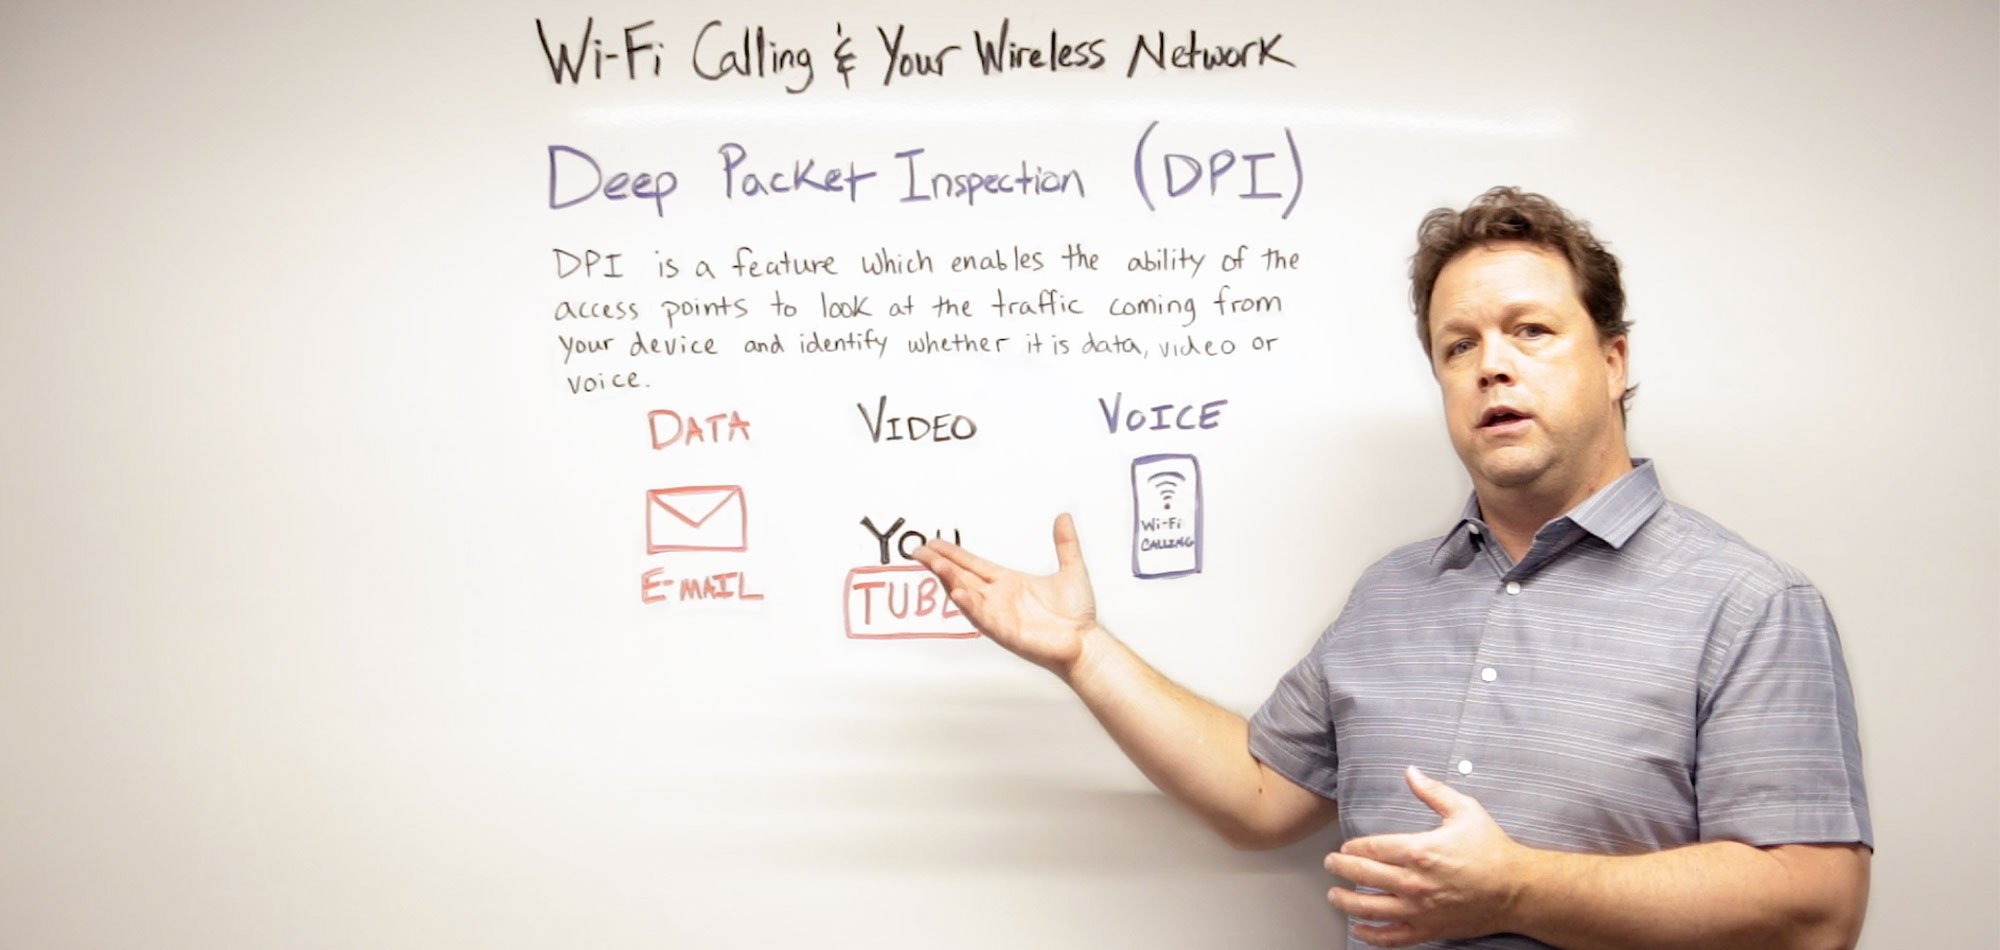 wifi-calling-and-your-wireless-network-part-2-whiteboard-wednesday-wlan-design-tips.jpg